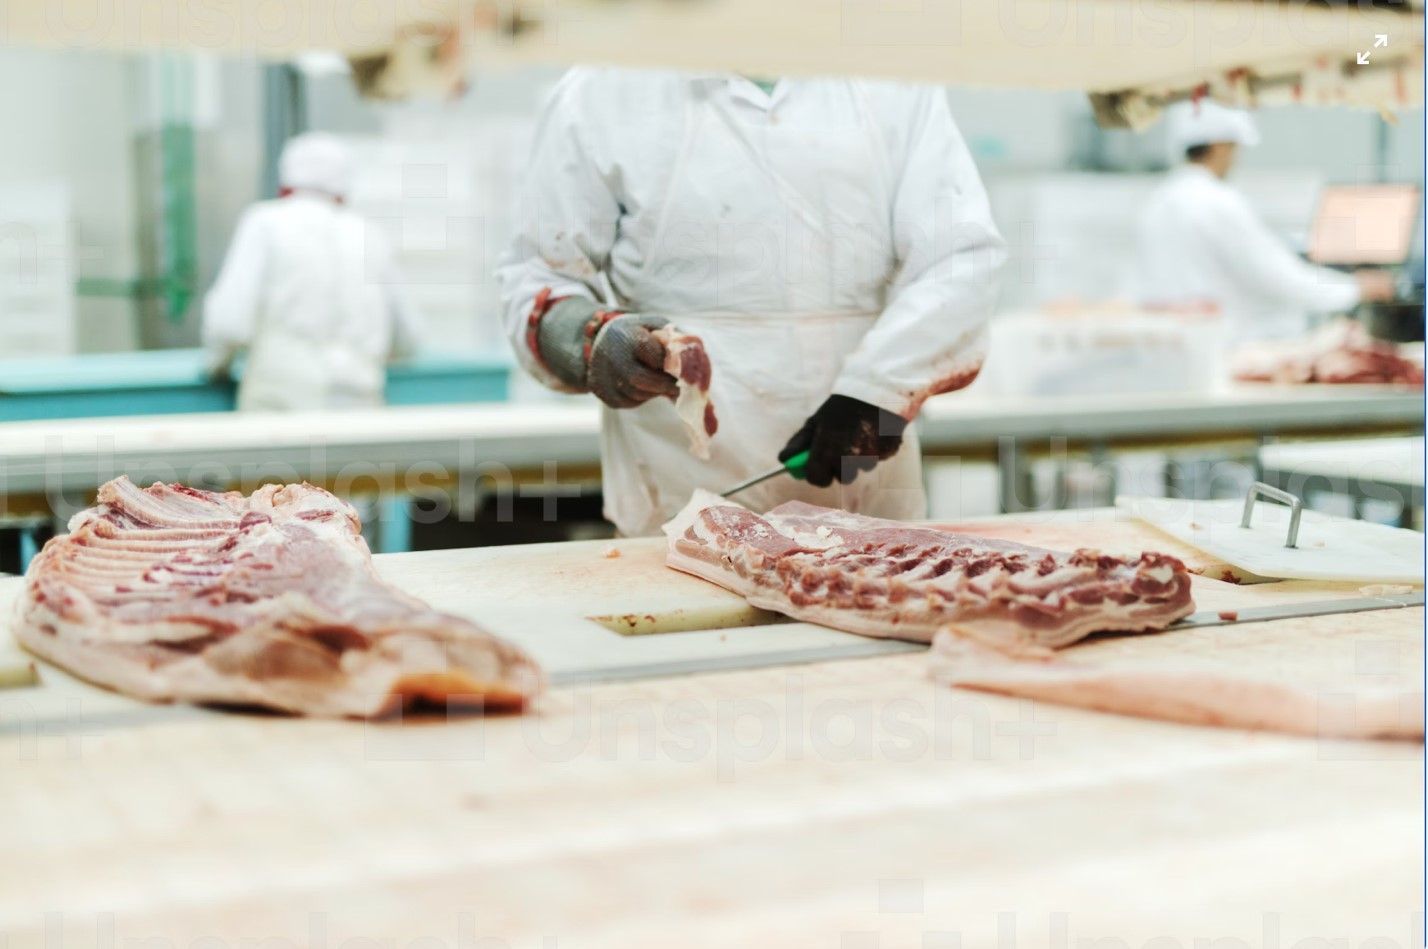 Slaughterhouses are endangering communities and threatening the health and well-being of all nearby. FSIS and OSHA need better standards to acknowledge these concerns.